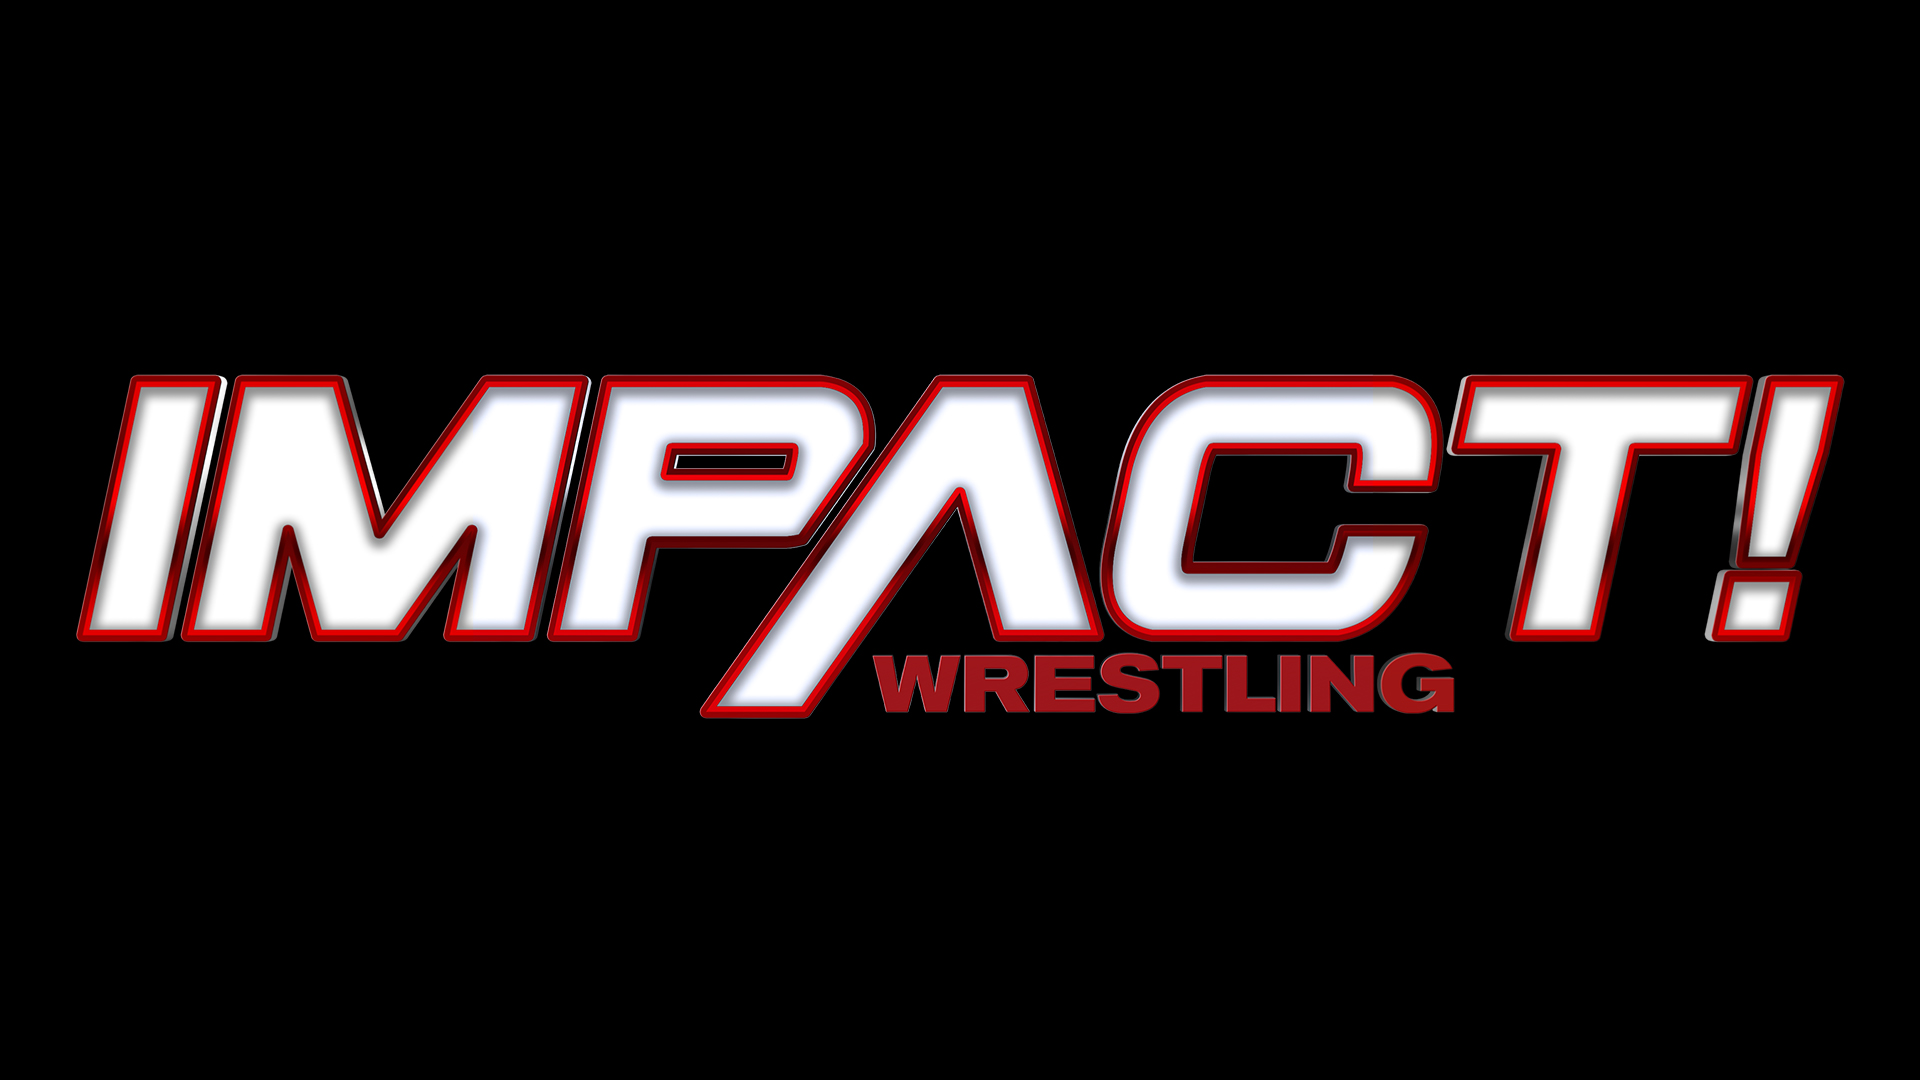 Current Impact Champion Possibly Headed to AEW or Back to WWE?